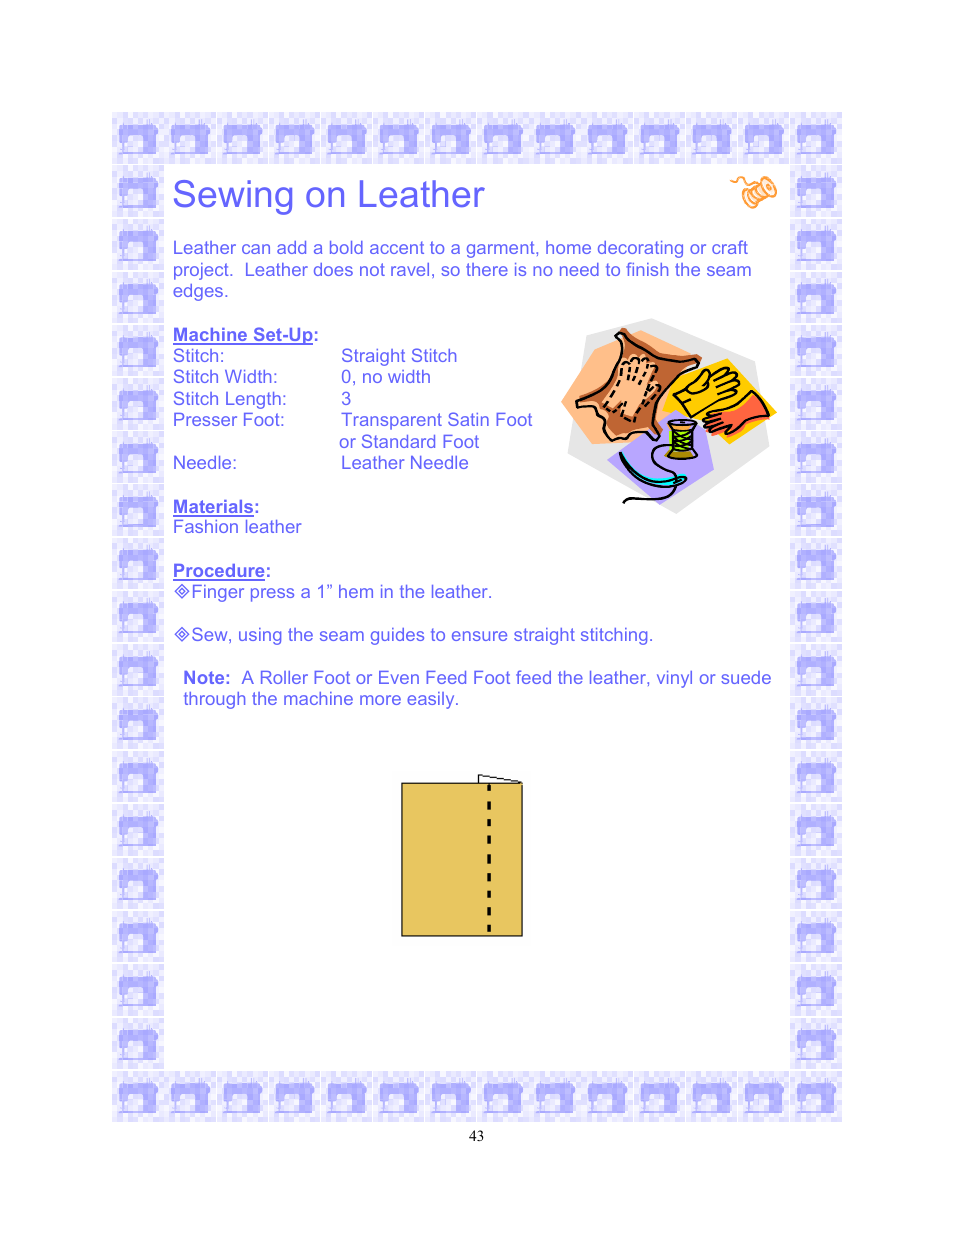 Sewing on leather | SINGER 6550-WORKBOOK Scholastic User Manual | Page 47 / 59